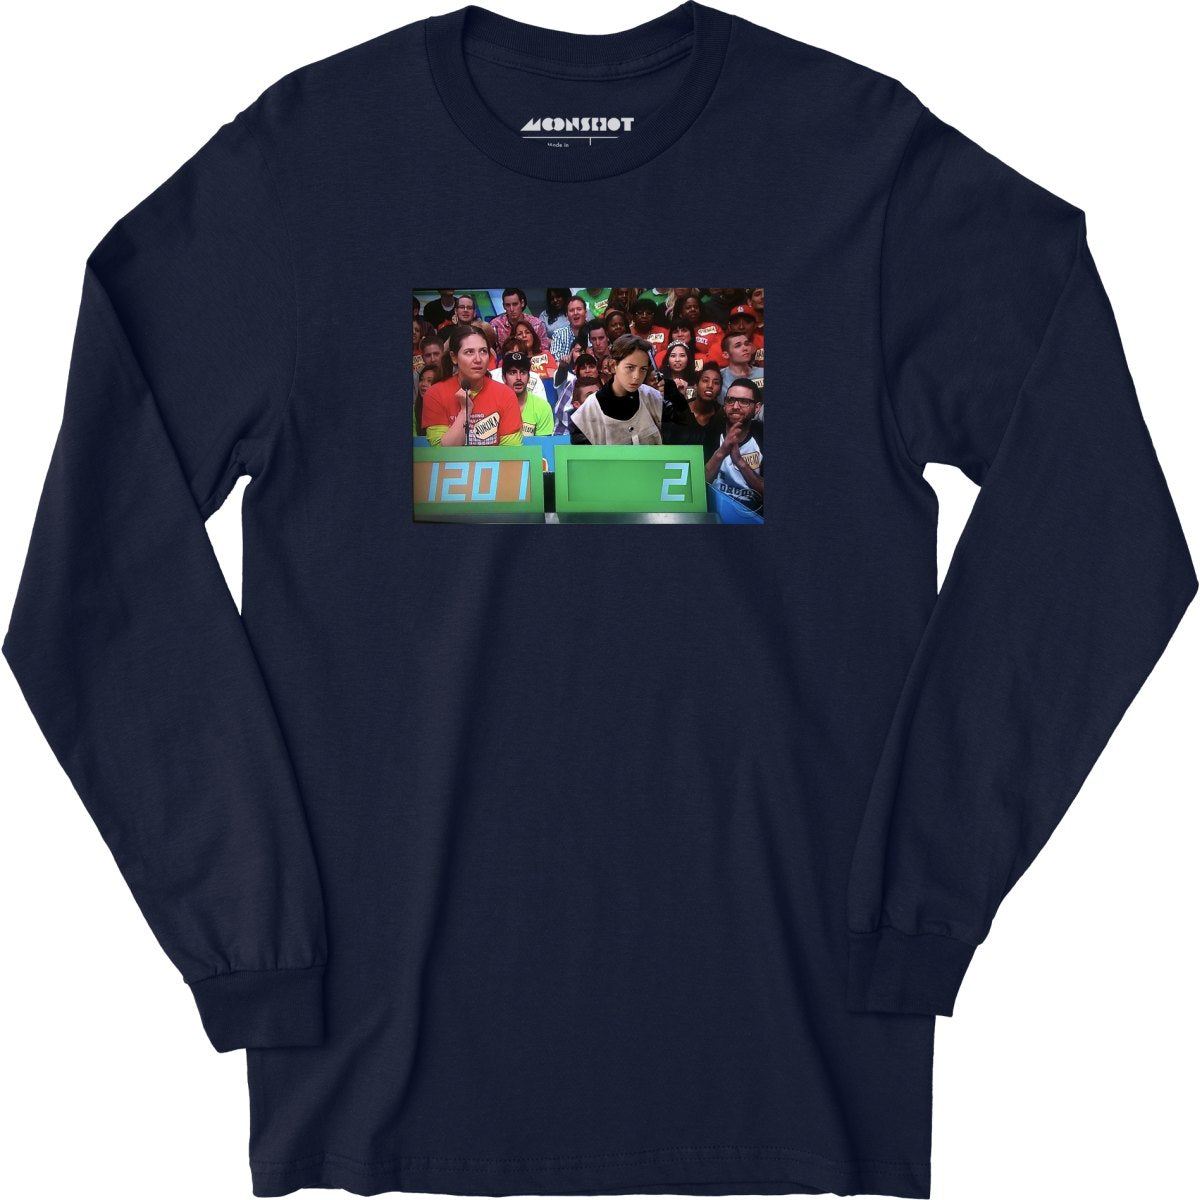 Better Off Dead The Price is Right Mashup - Long Sleeve T-Shirt